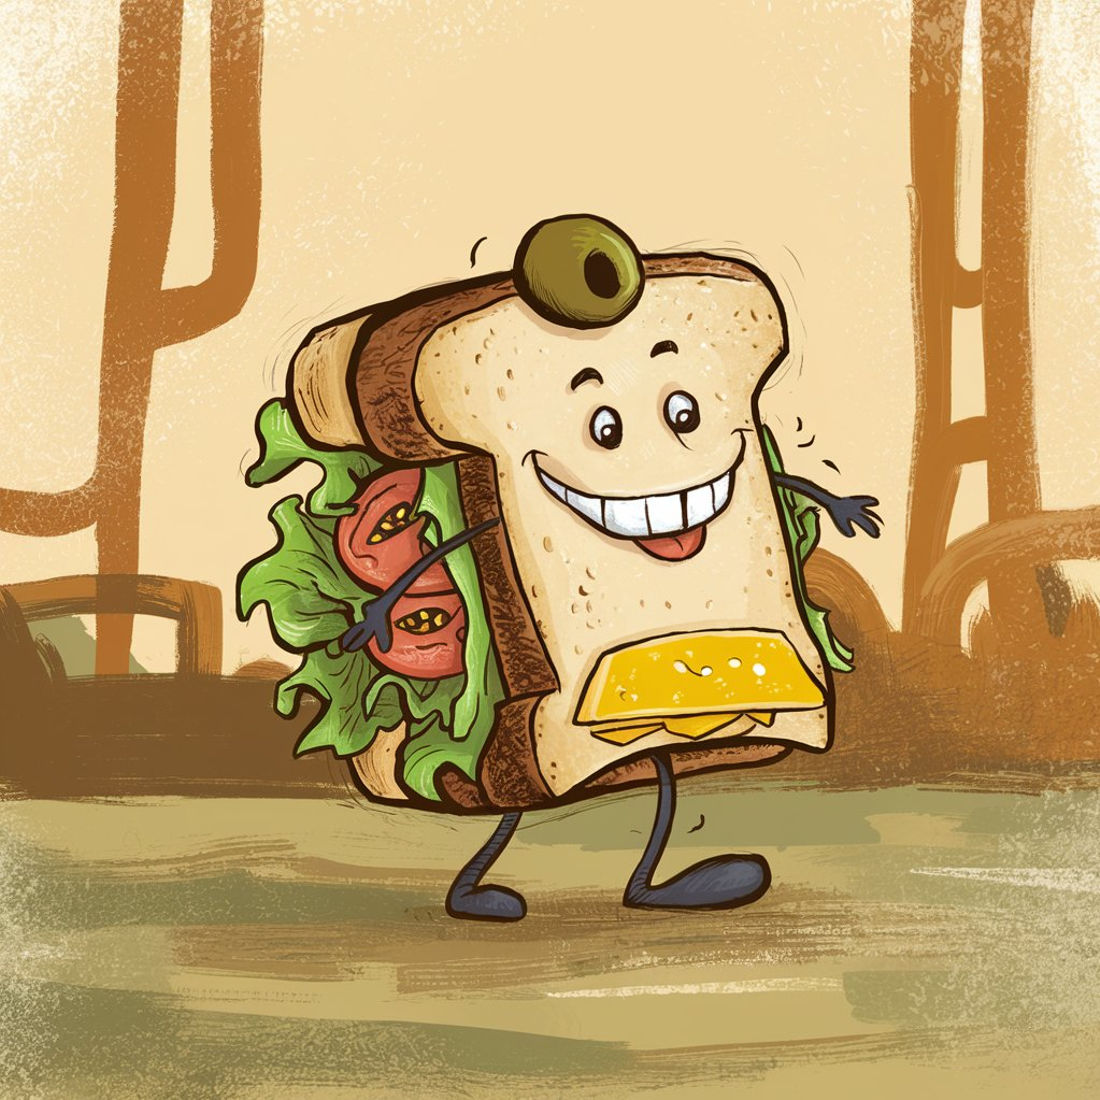 A Sandwich Charecter:"Smiley Stack" preview image.